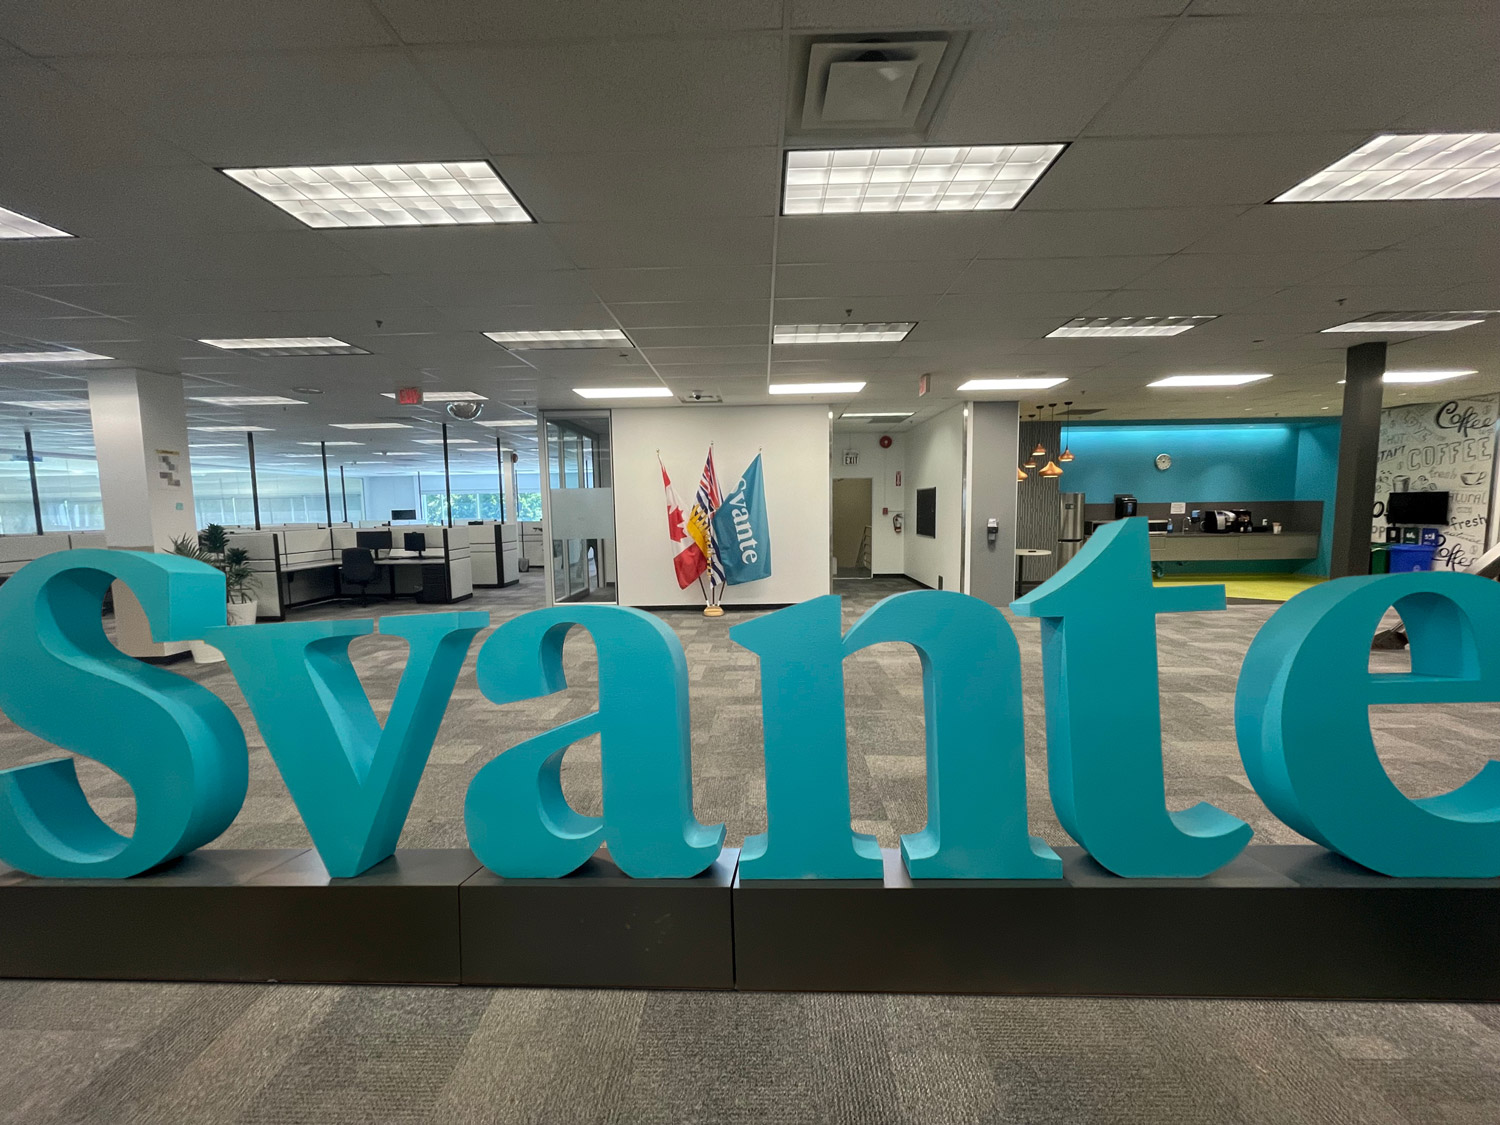 Large Foam Letters Custom 3D Fabrication Services - WhiteClouds